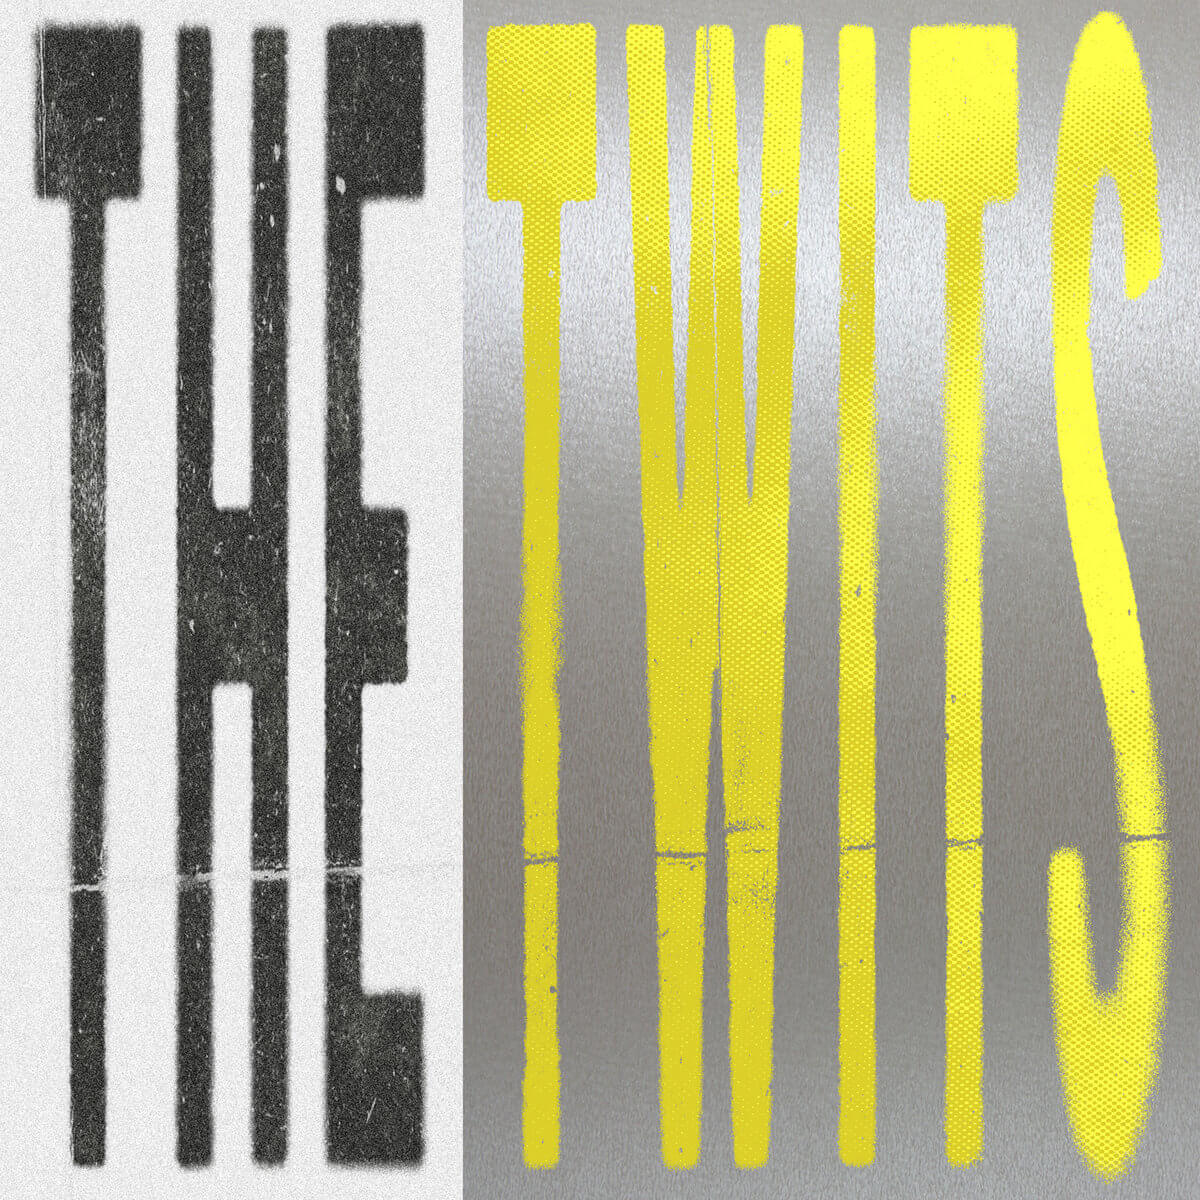 the twits by bar italia album review by Andy Steiner for Northern Transmissions. The UK band's full-length is now out via Matador Records